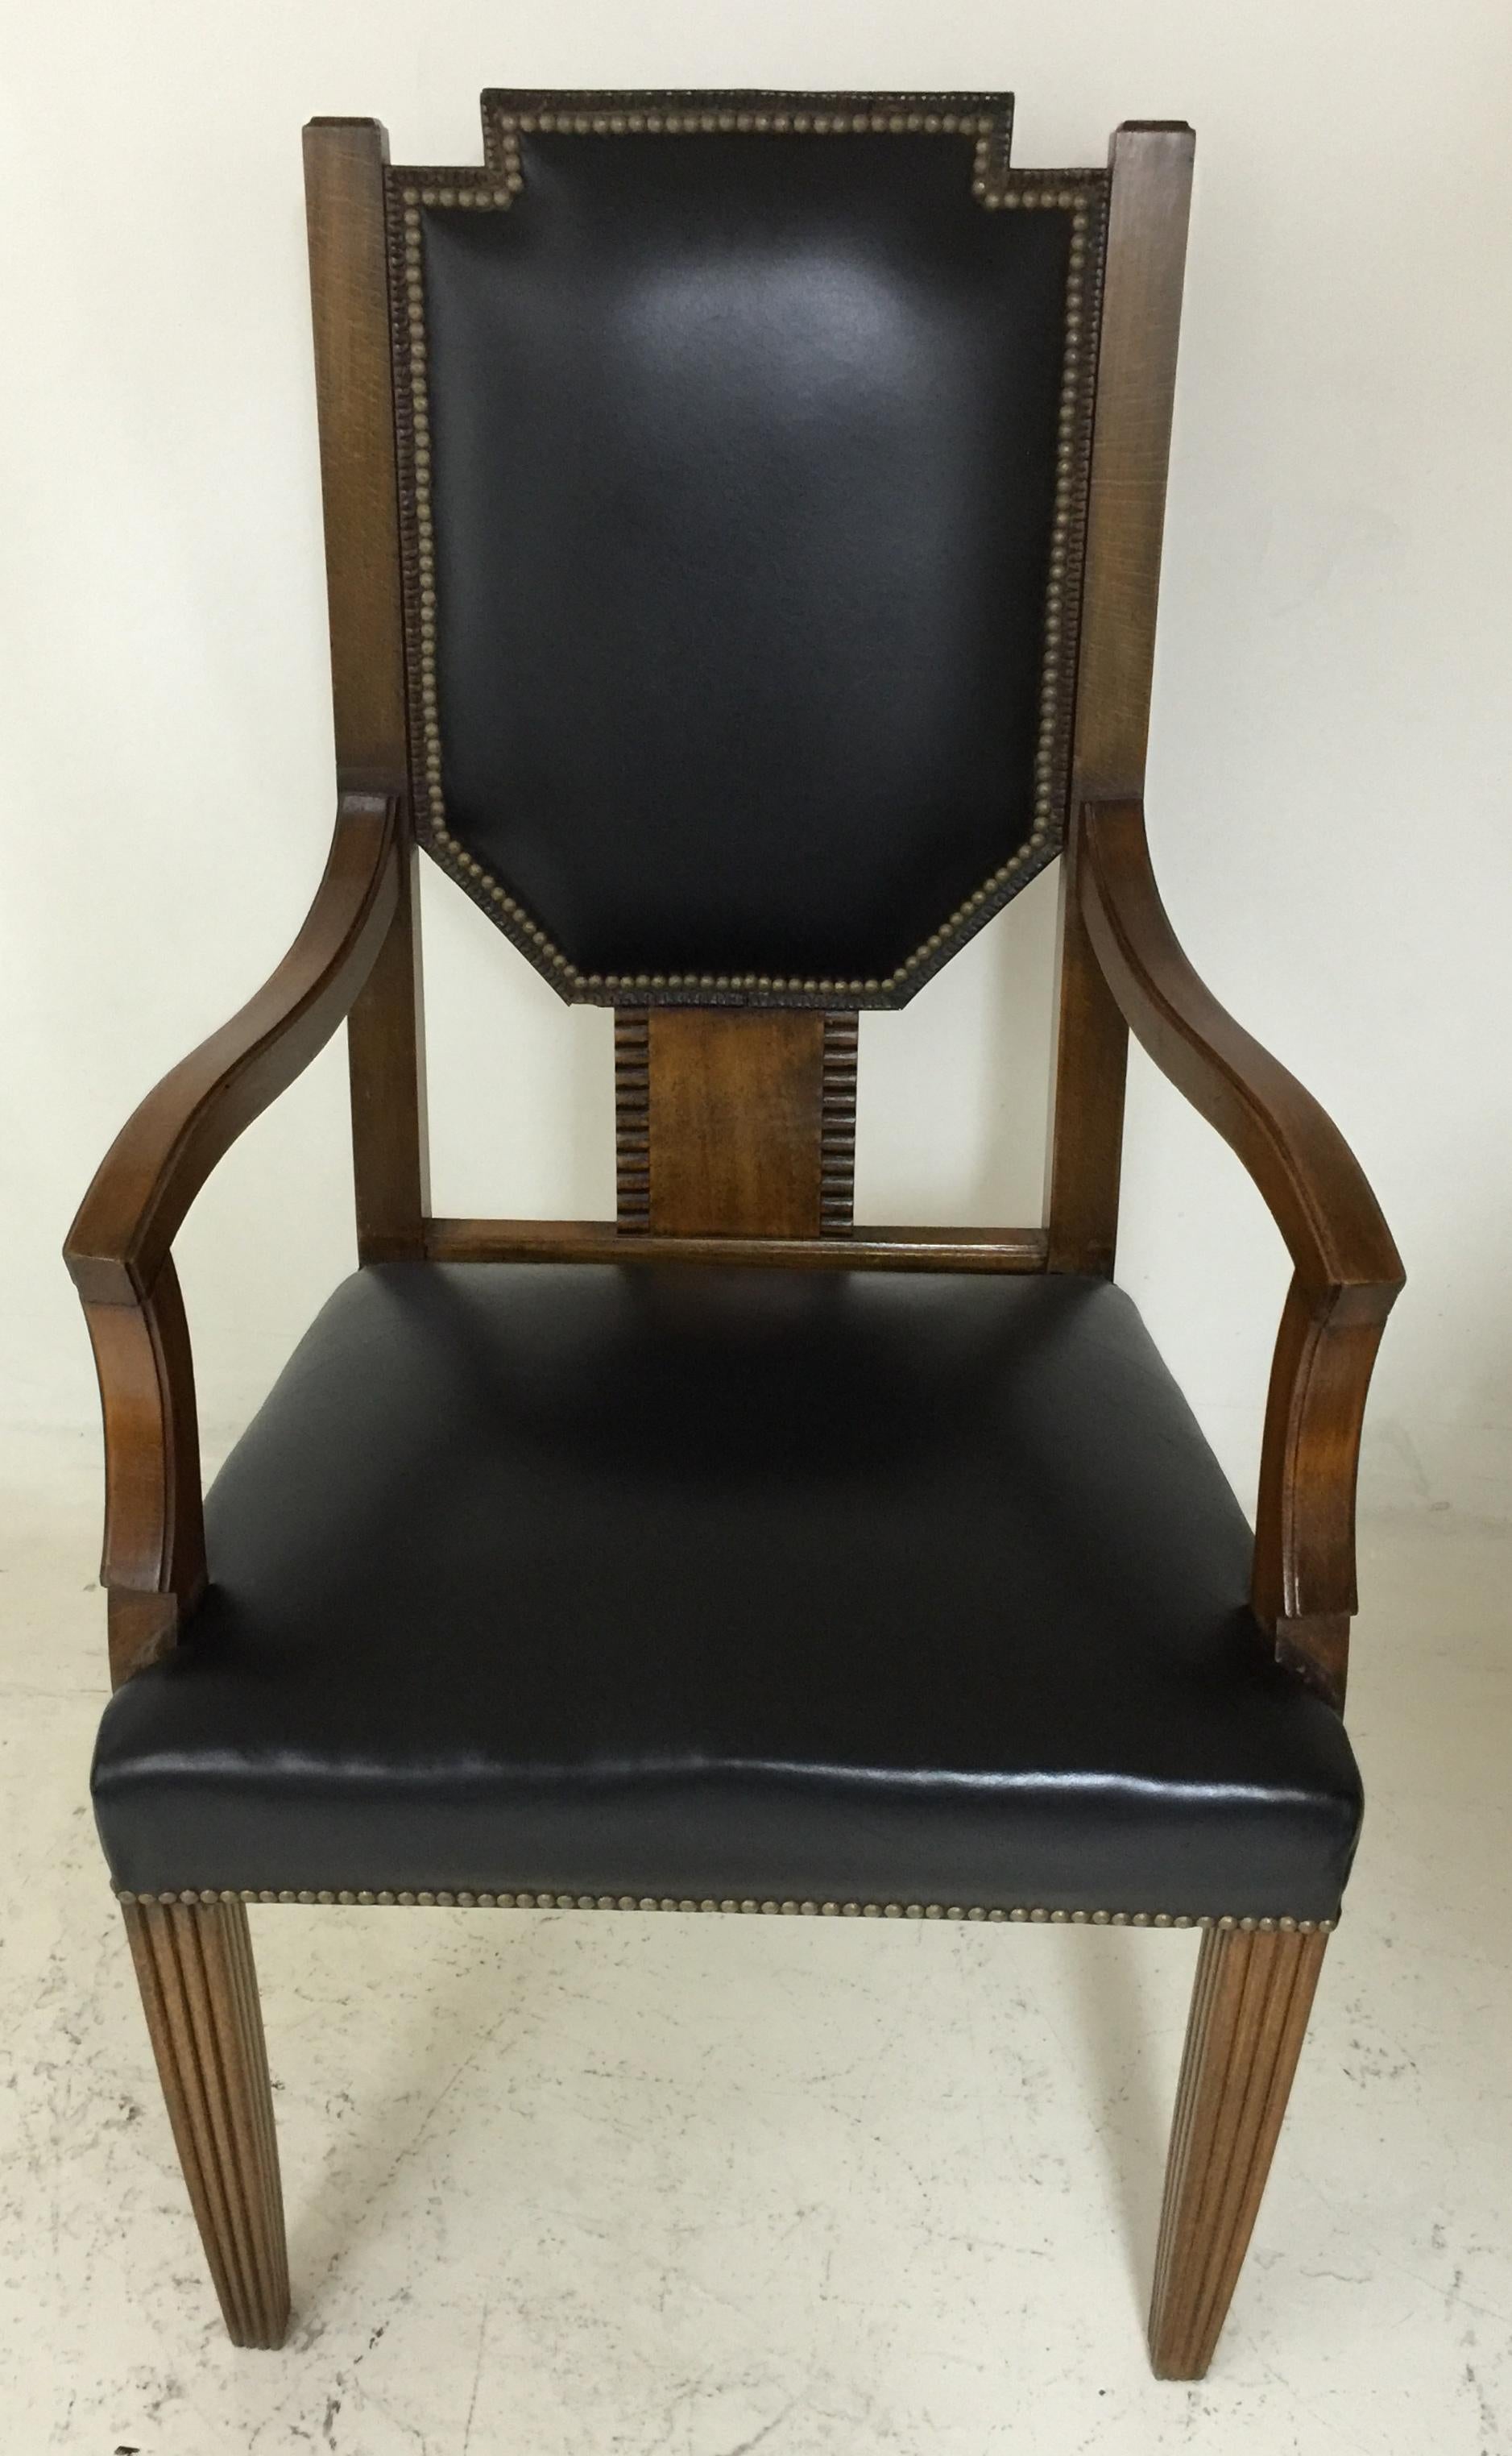 Art Deco desk chair

Material: leather and wood
Year: 1930
Country: Germany
If you are looking for a desk chair to match your desk, we have what you need.
We have specialized in the sale of Art Deco and Art Nouveau and Vintage styles since 1982.If